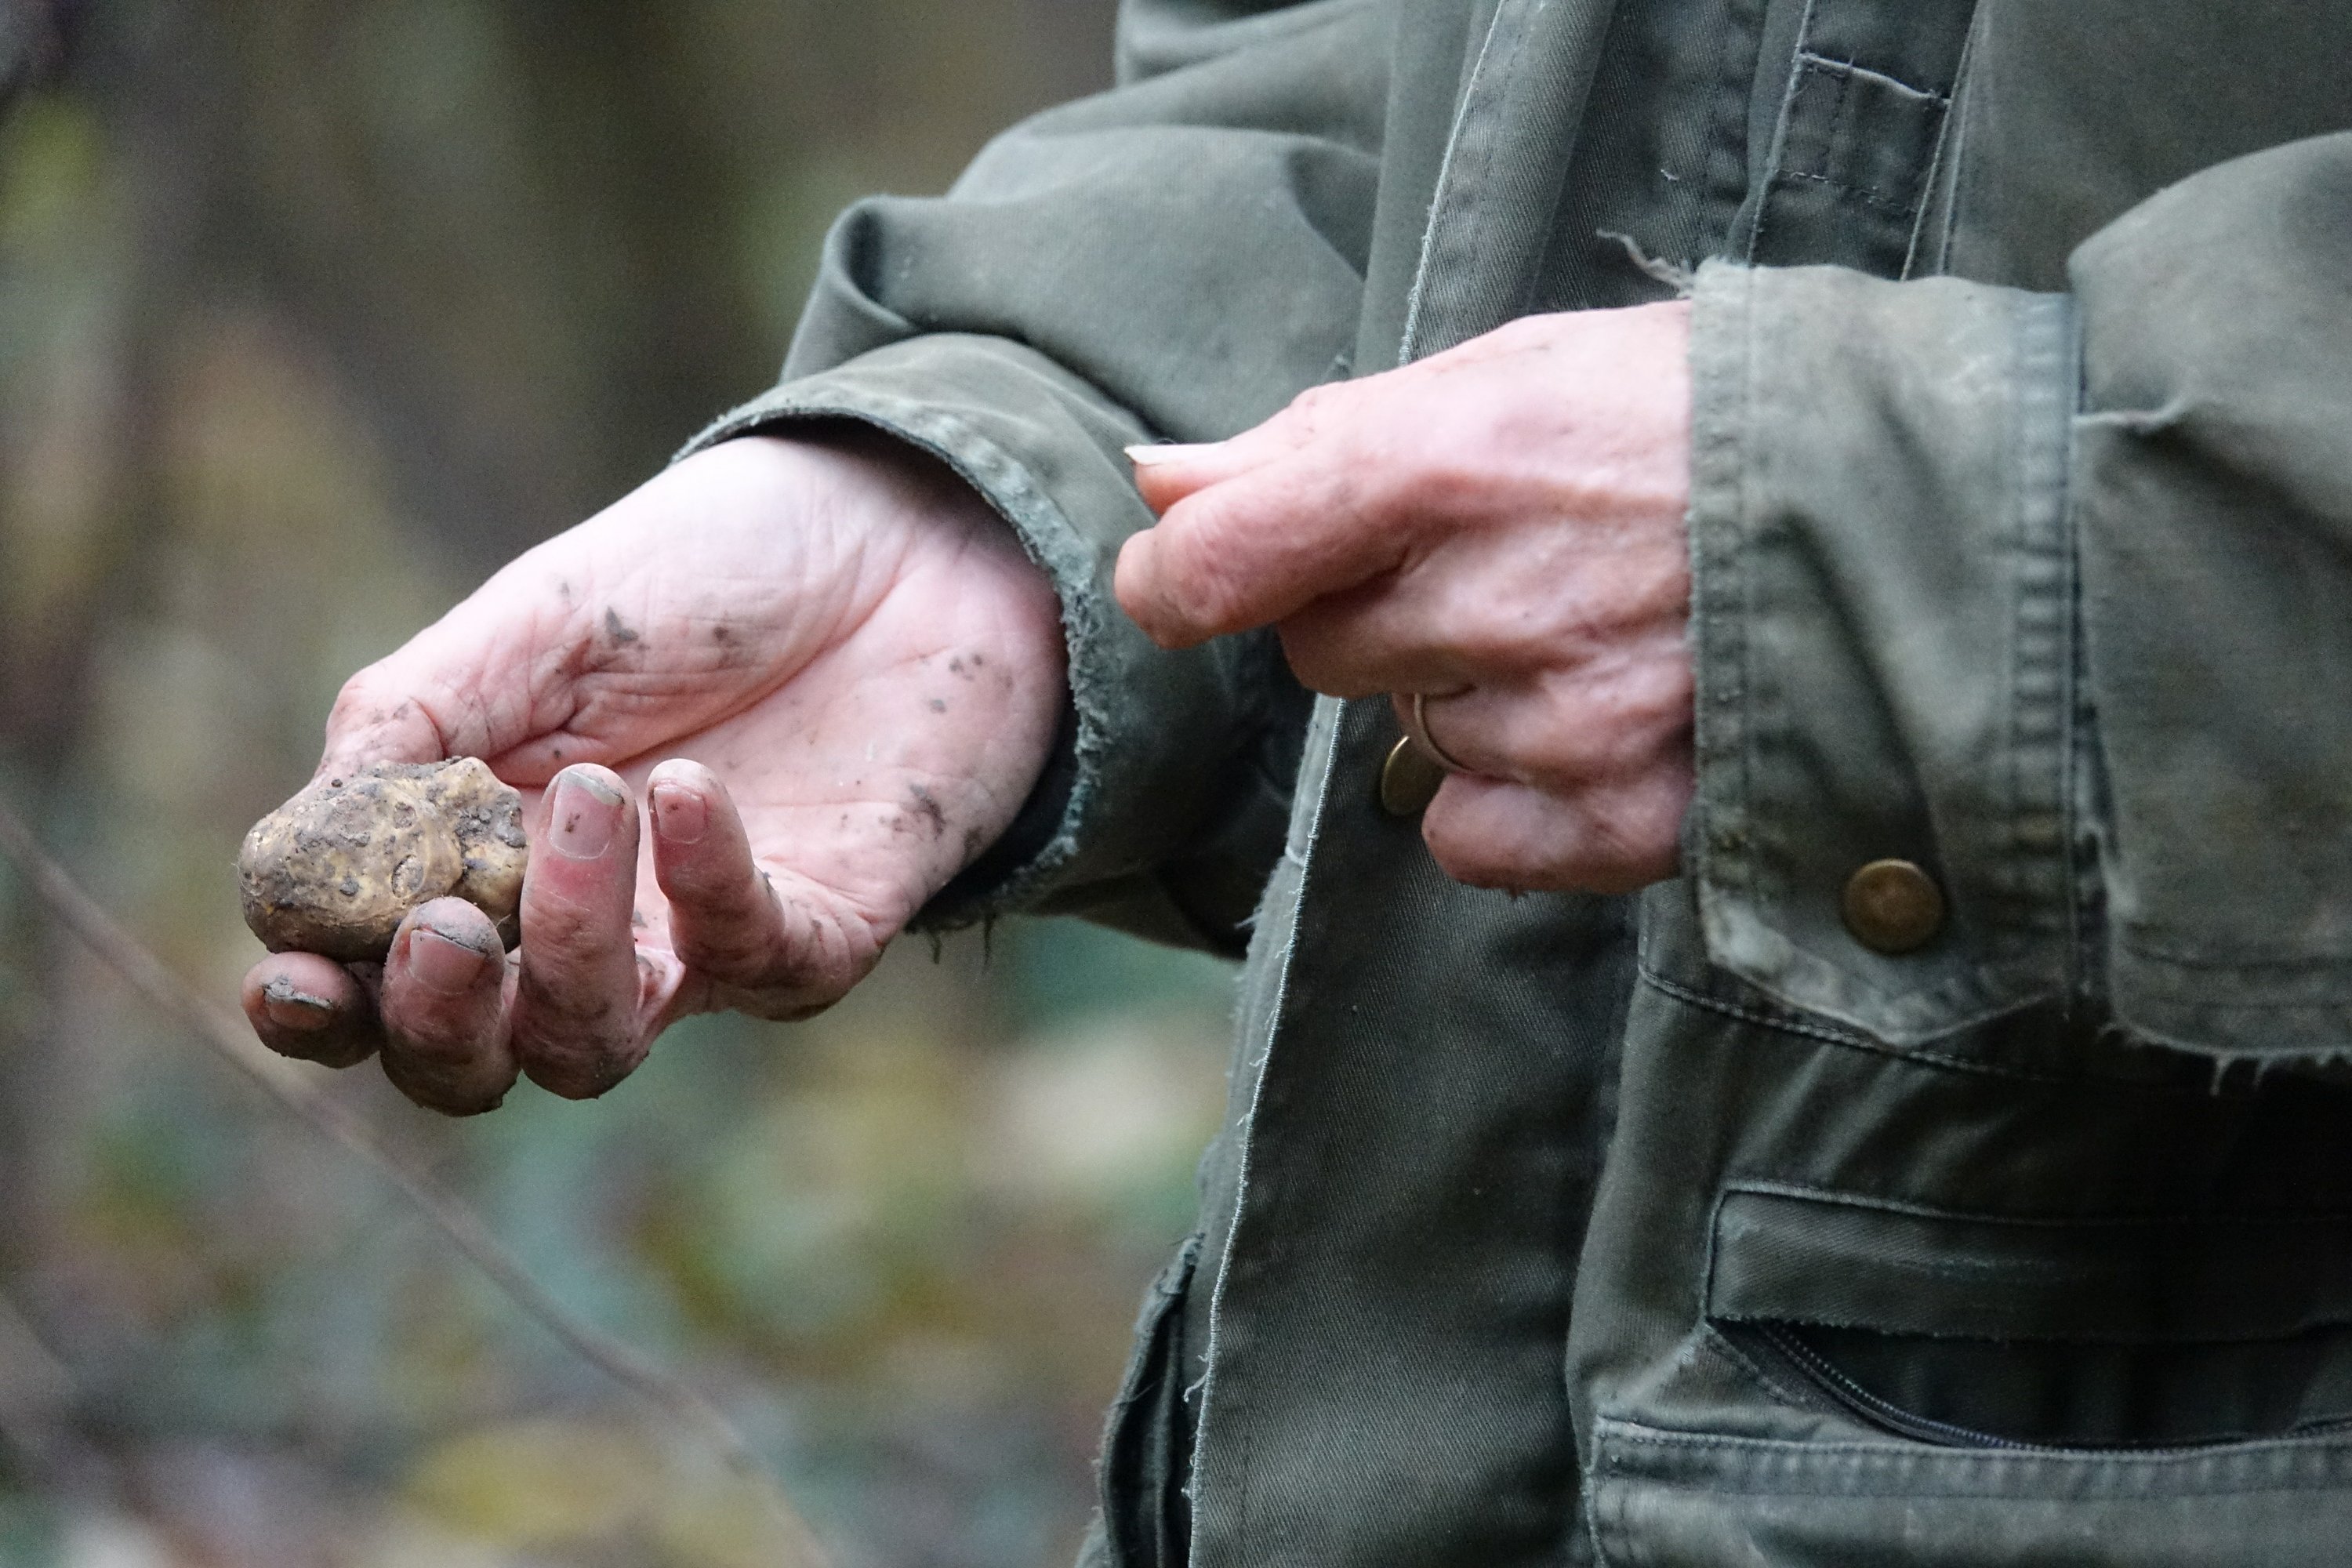 Italy's white truffle hunters worry about climate change - Associated Press